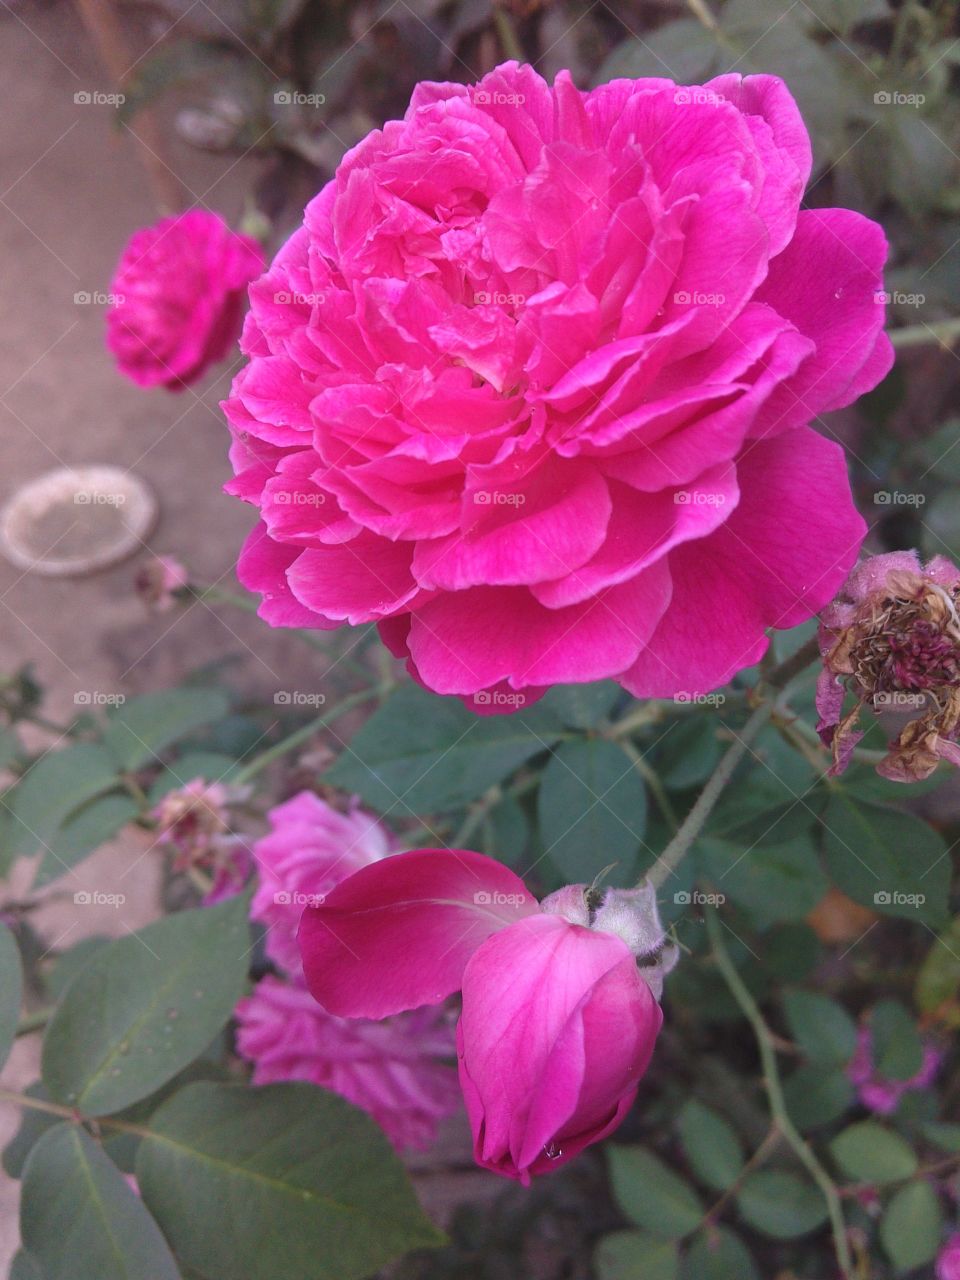 roses. very nice rose to look at